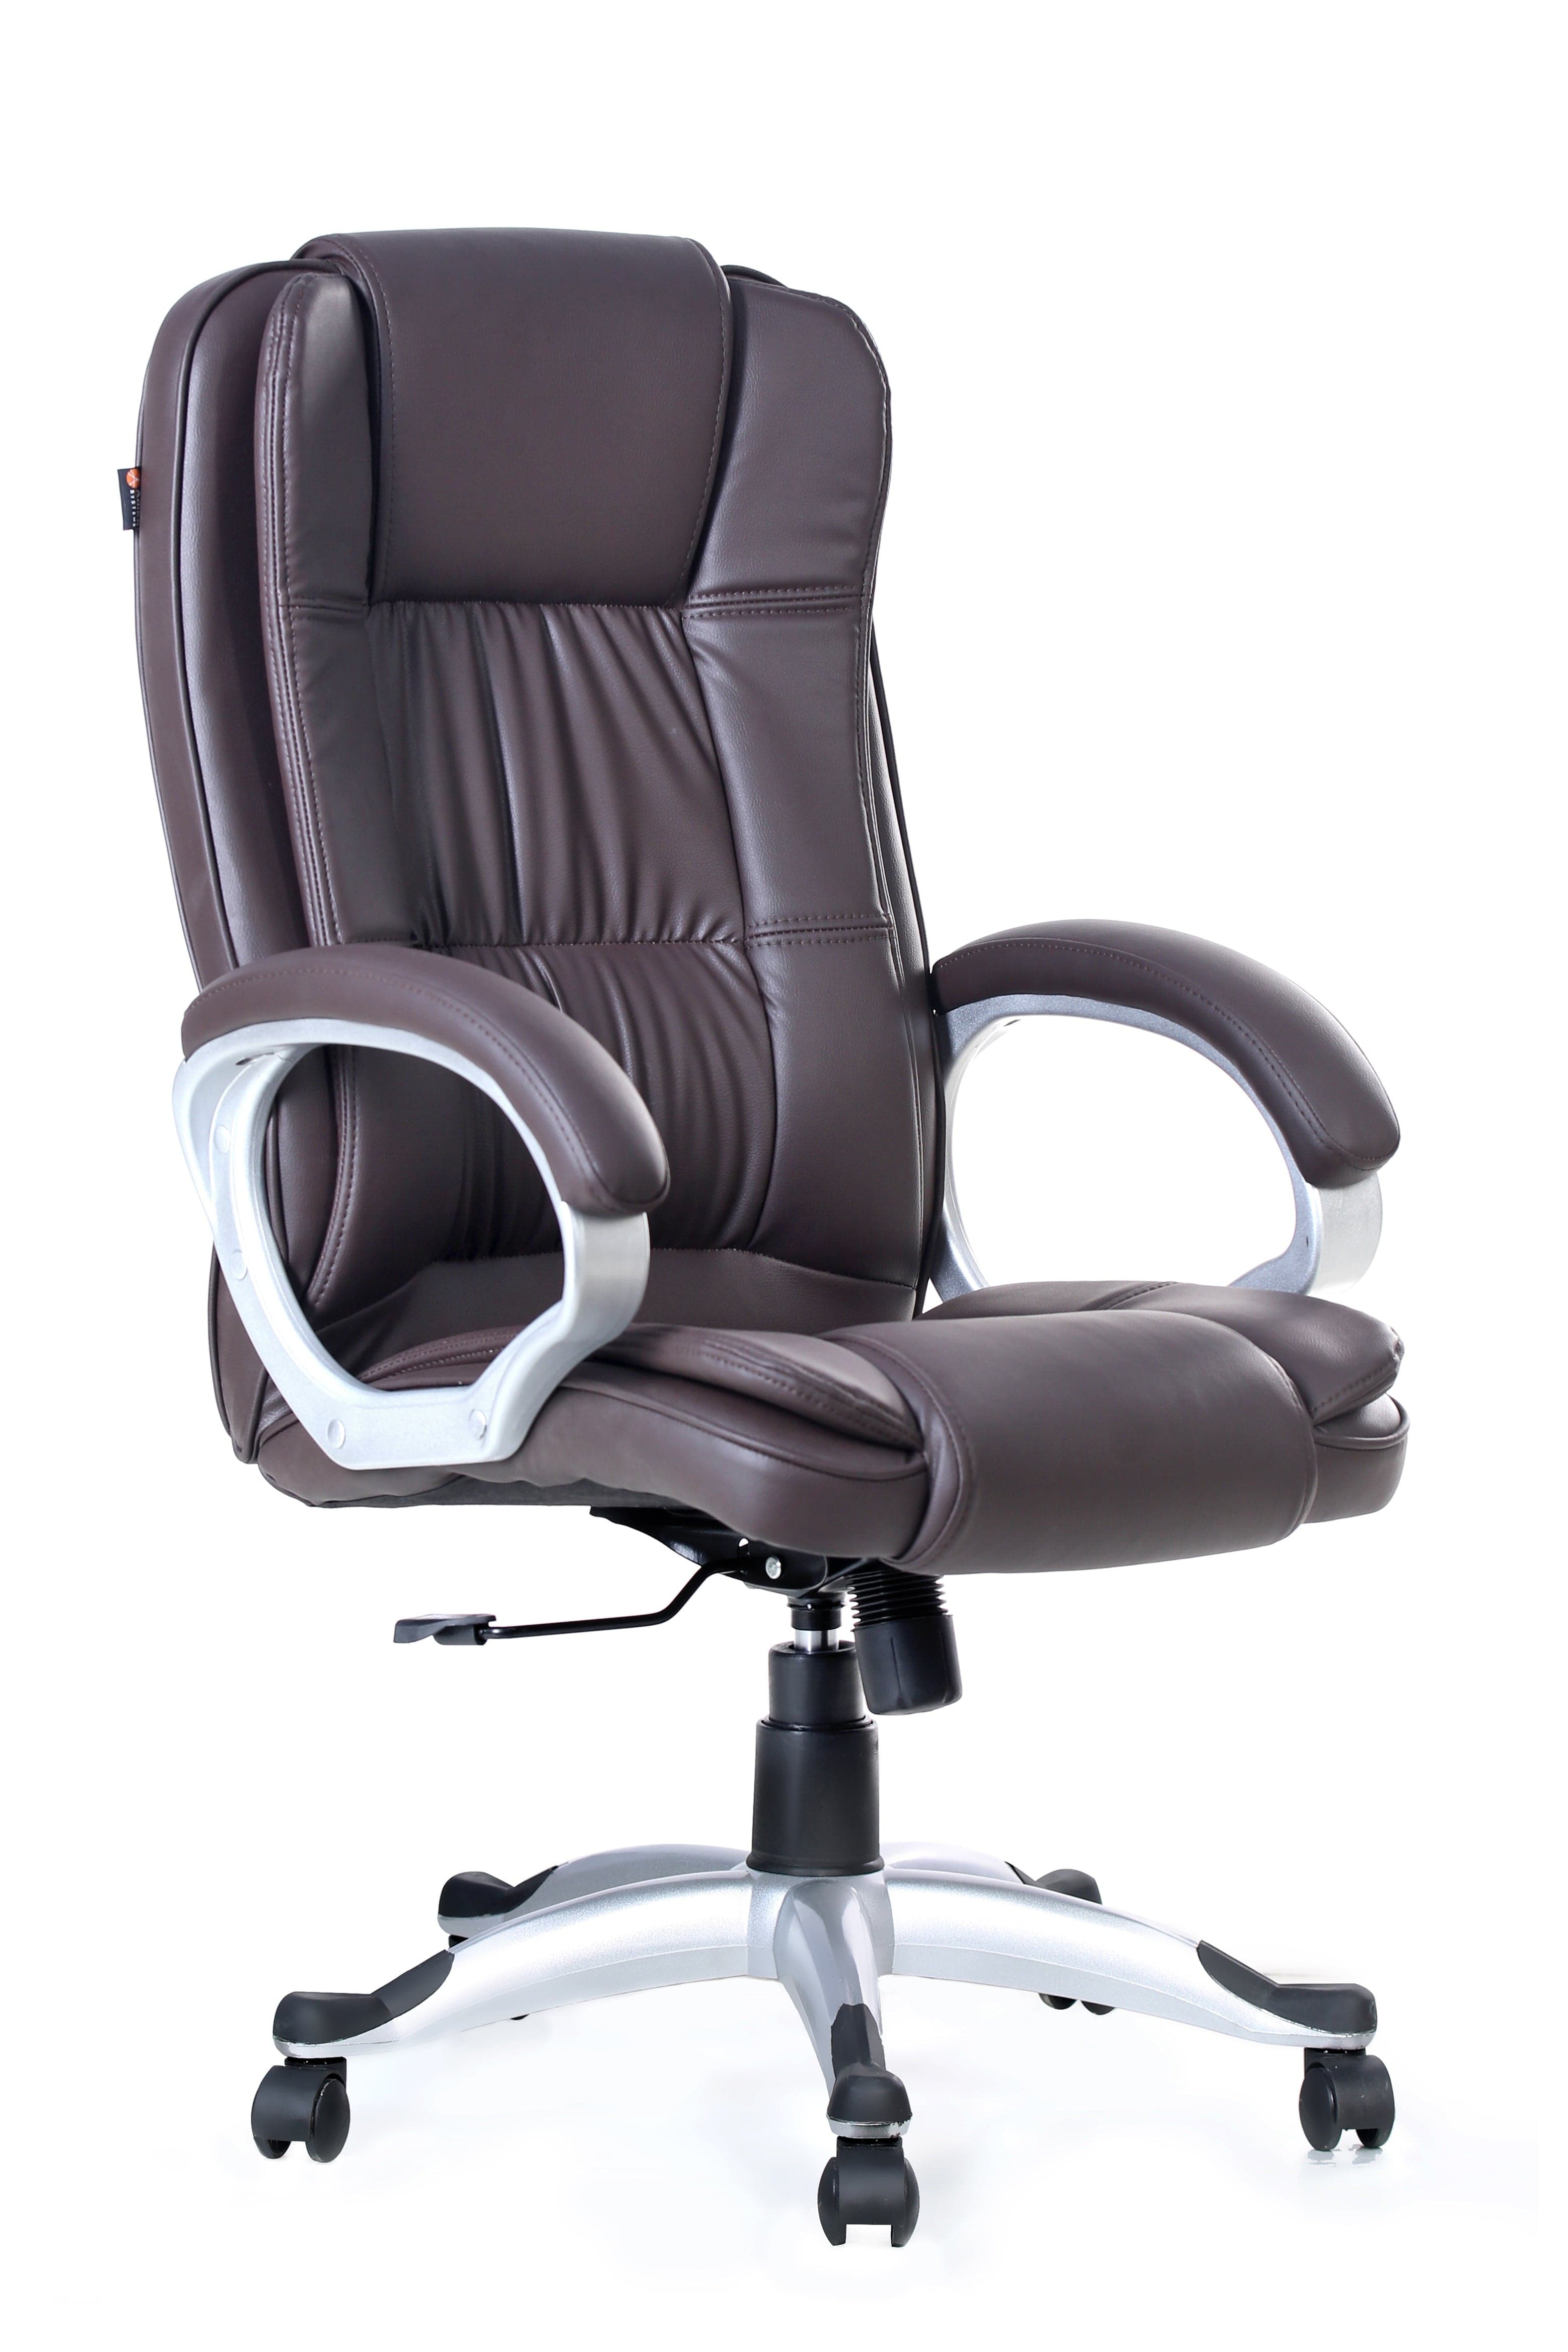 Smart Executive Chair in Brown Colour by Adiko Systems